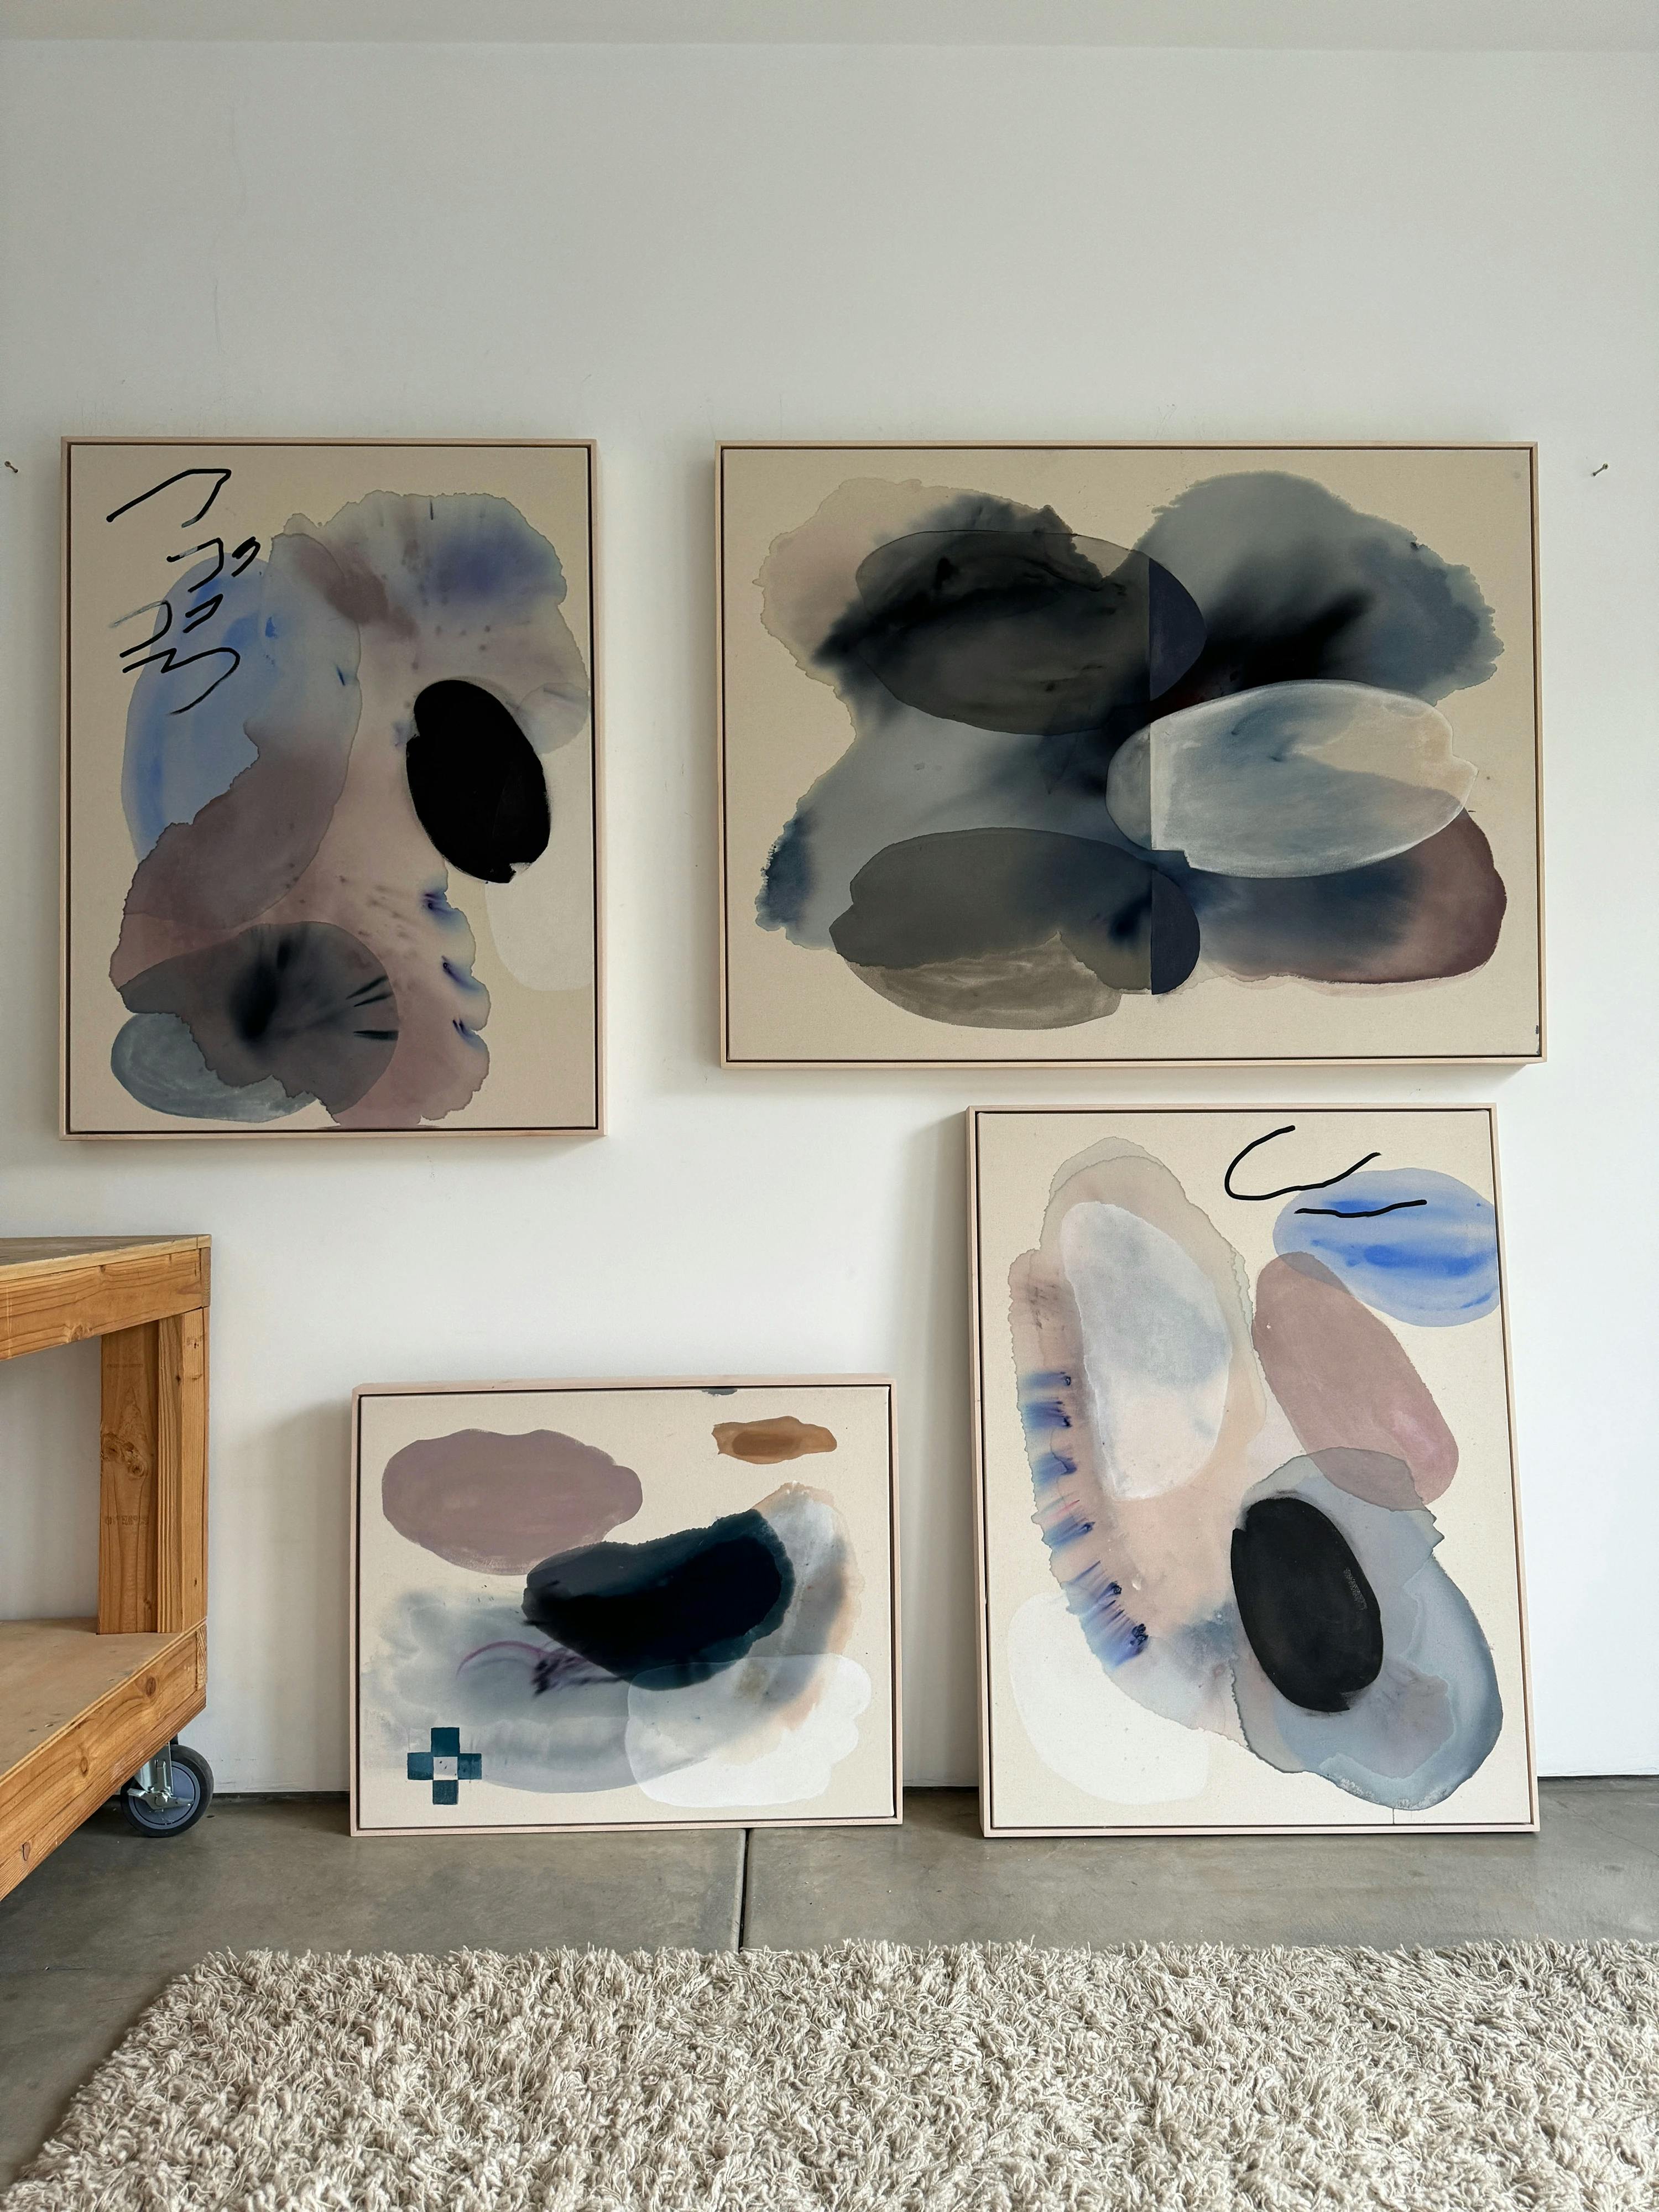 Four abstract, gestural paintings of various sizes by artist Karina Bania installed in her studio.